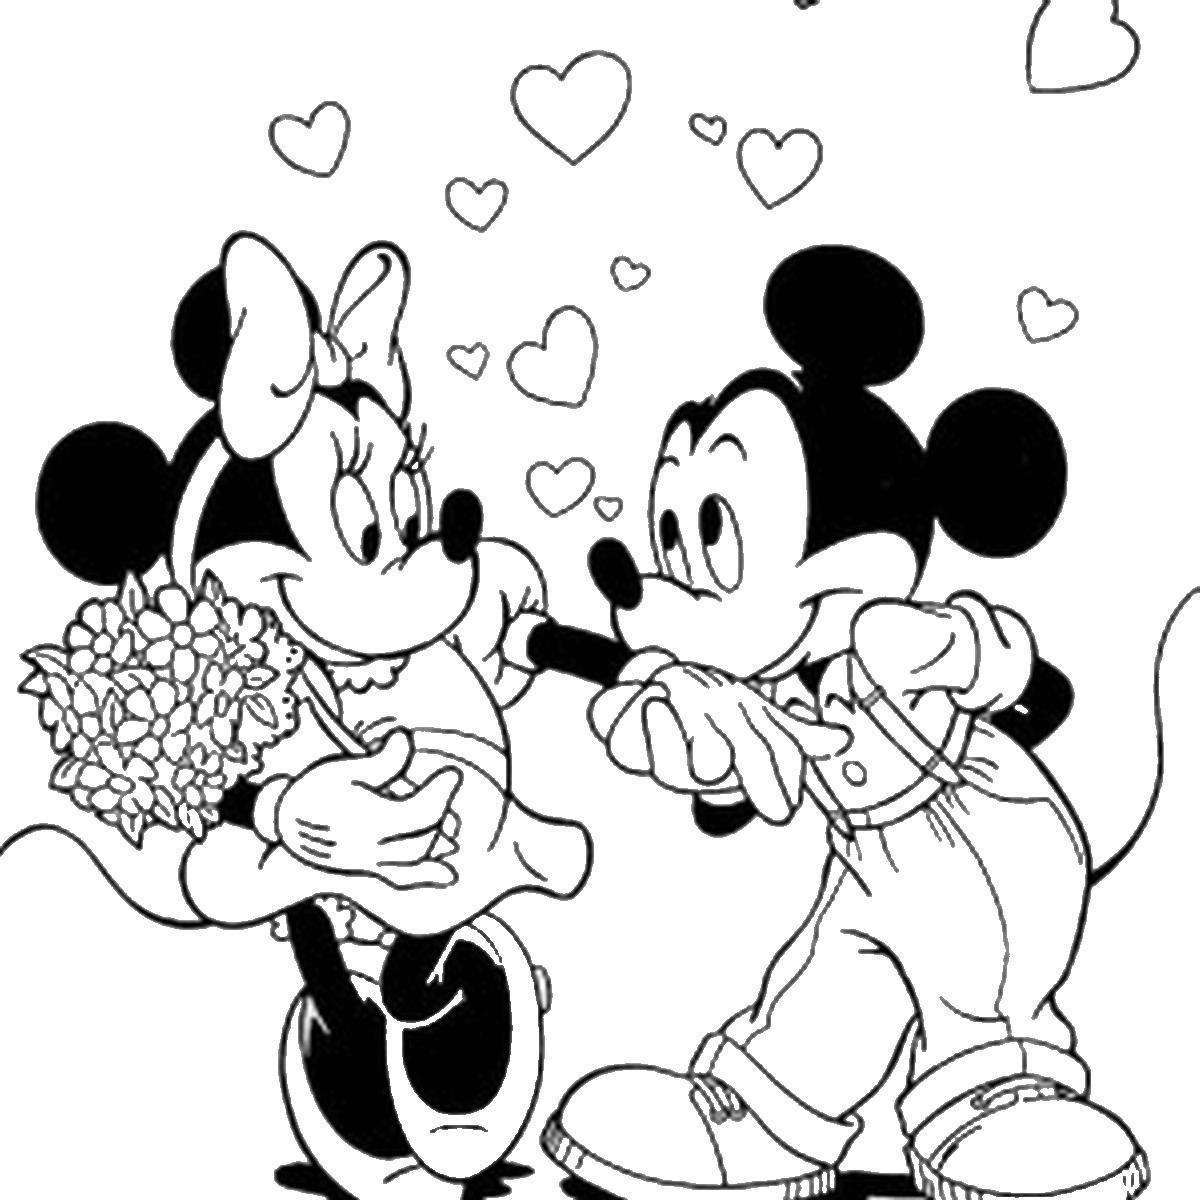 Valentines Day Free Printable Coloring Pages at GetDrawings | Free download